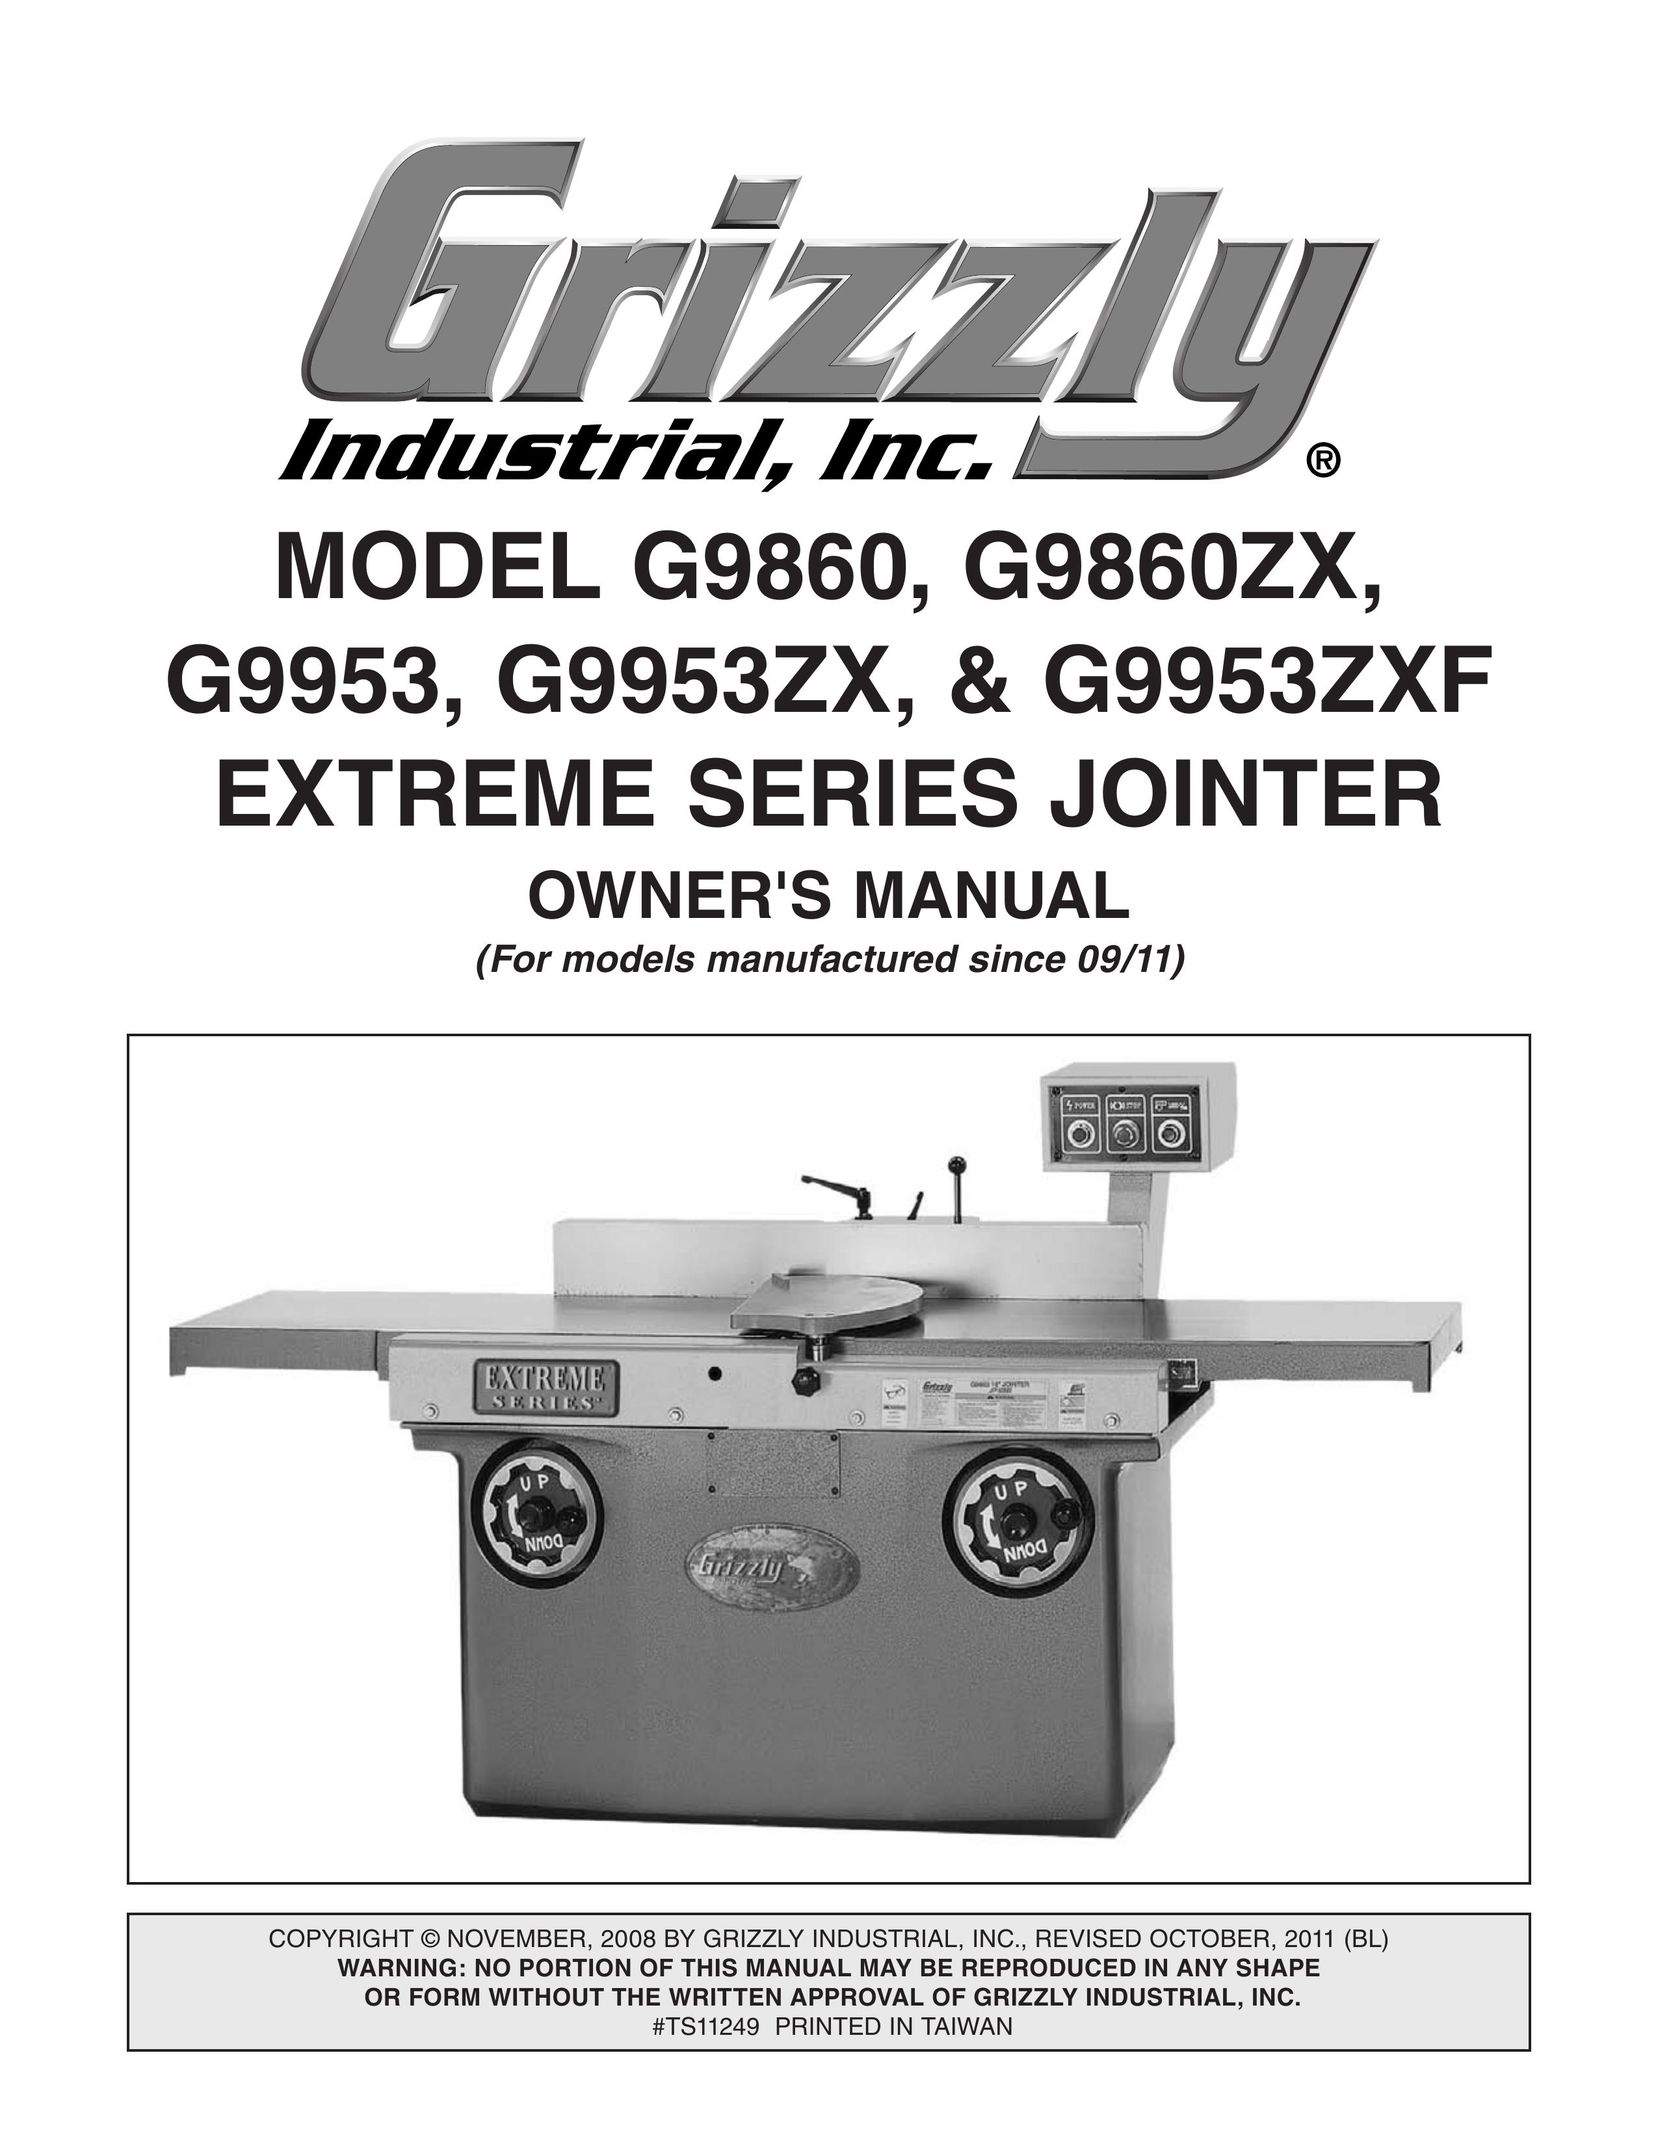 Grizzly G9860 Biscuit Joiner User Manual (Page 1)